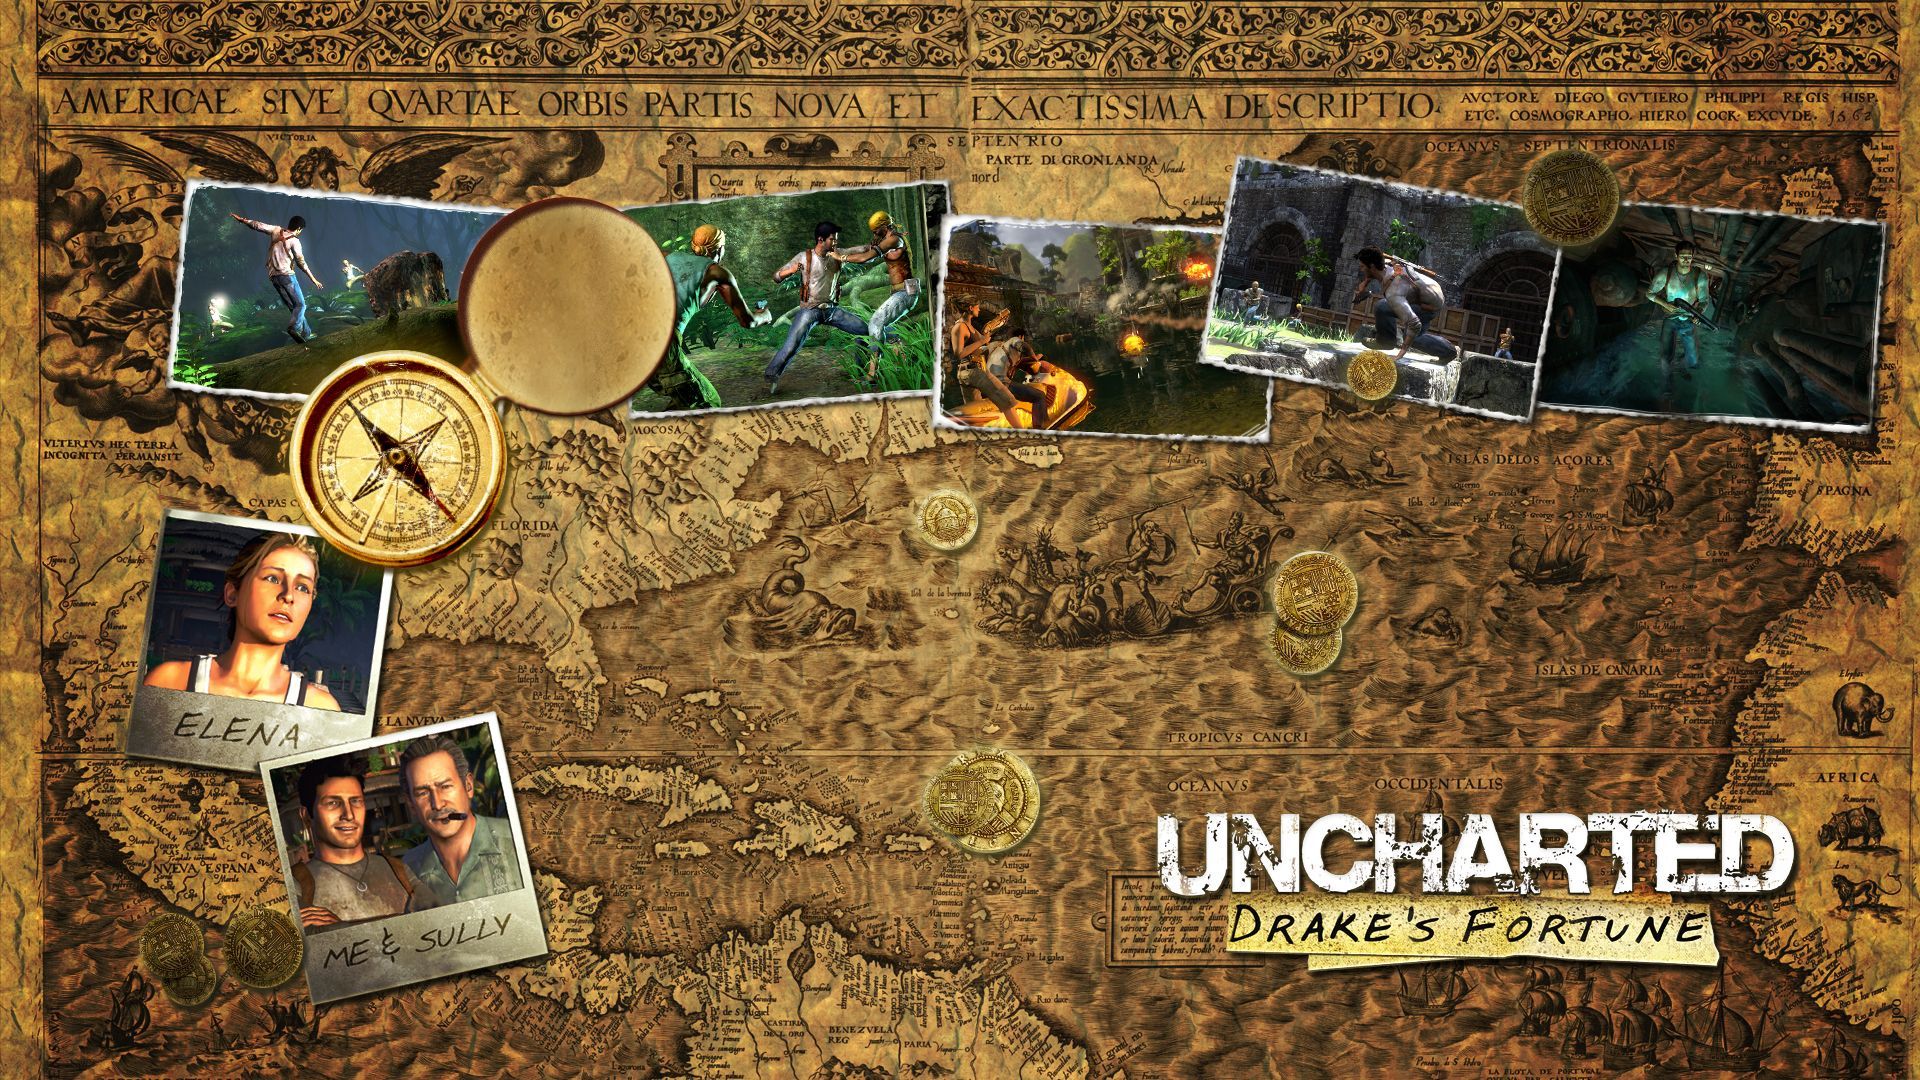 Uncharted Map Wallpaper. Uncharted drake's fortune, Uncharted, Map wallpaper